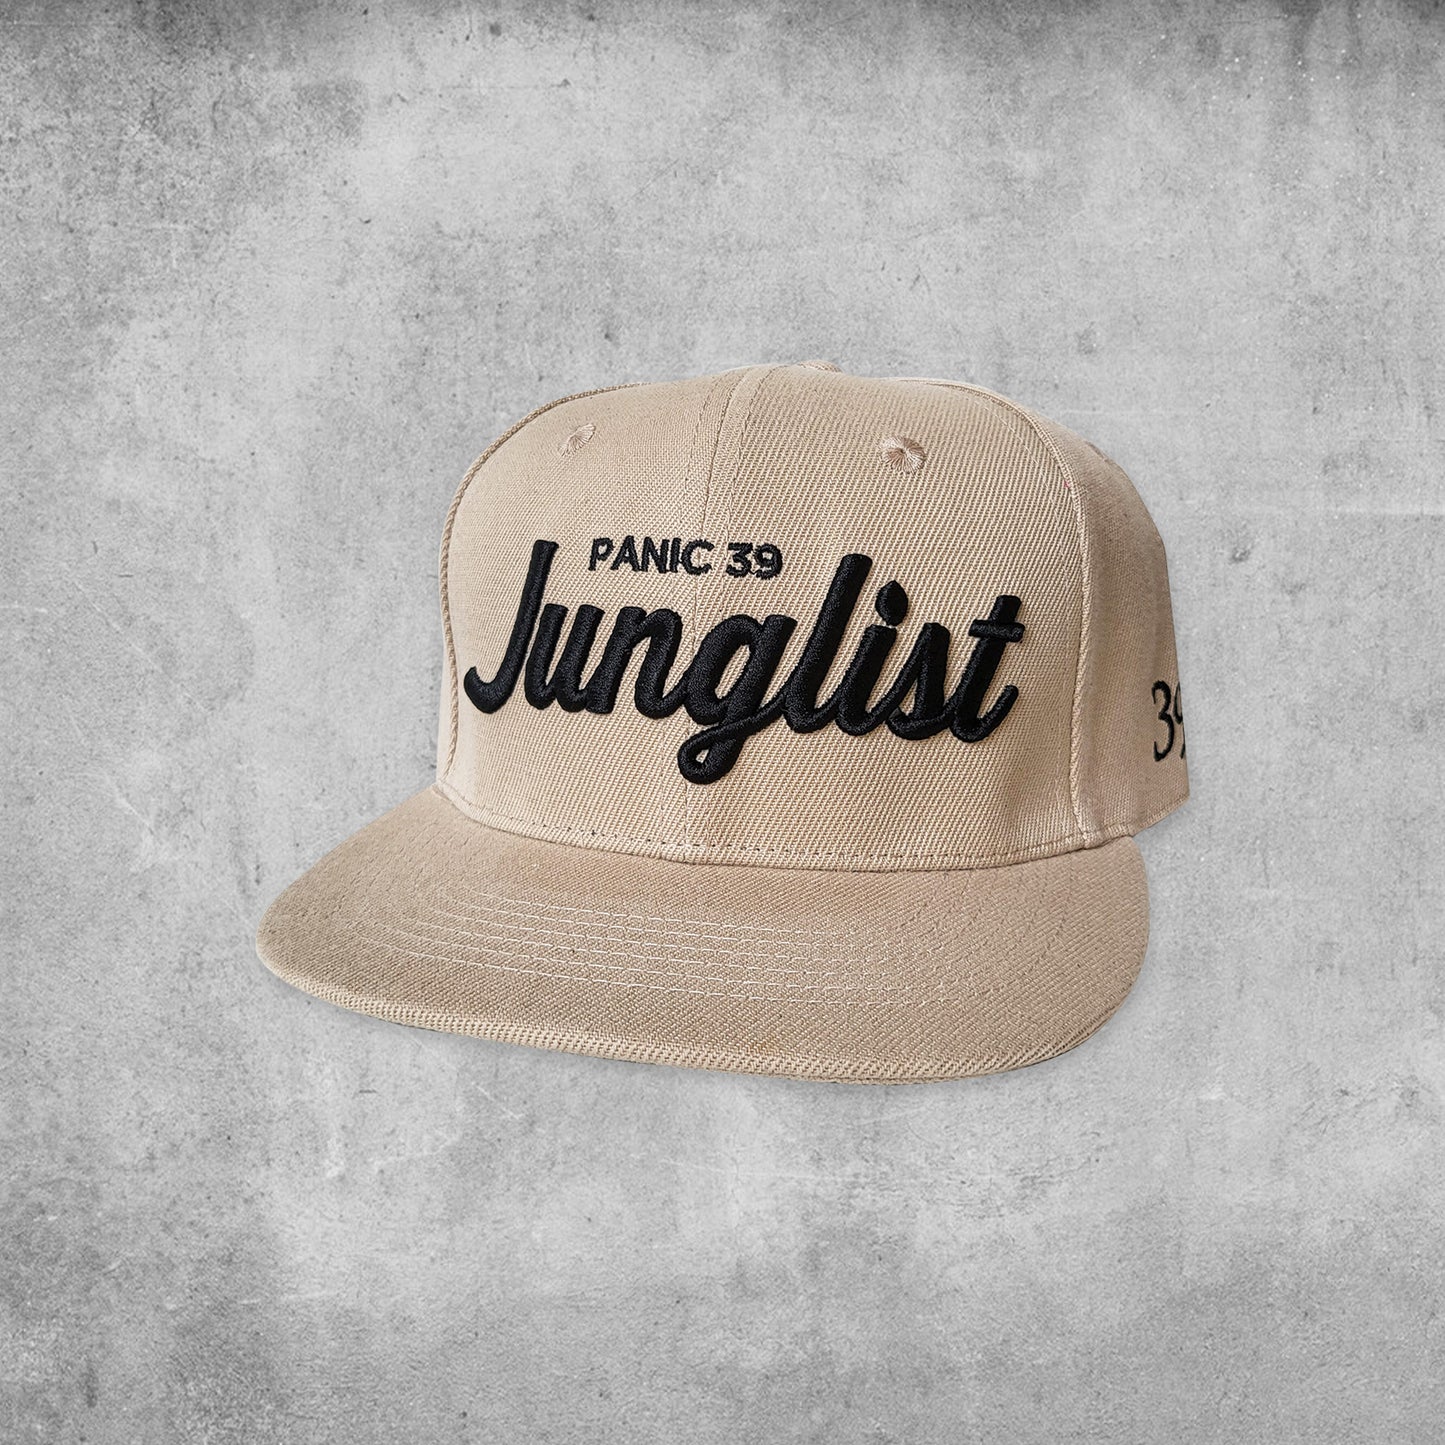 Panic 39 branded snap back hat in tan with black puff embroidery.